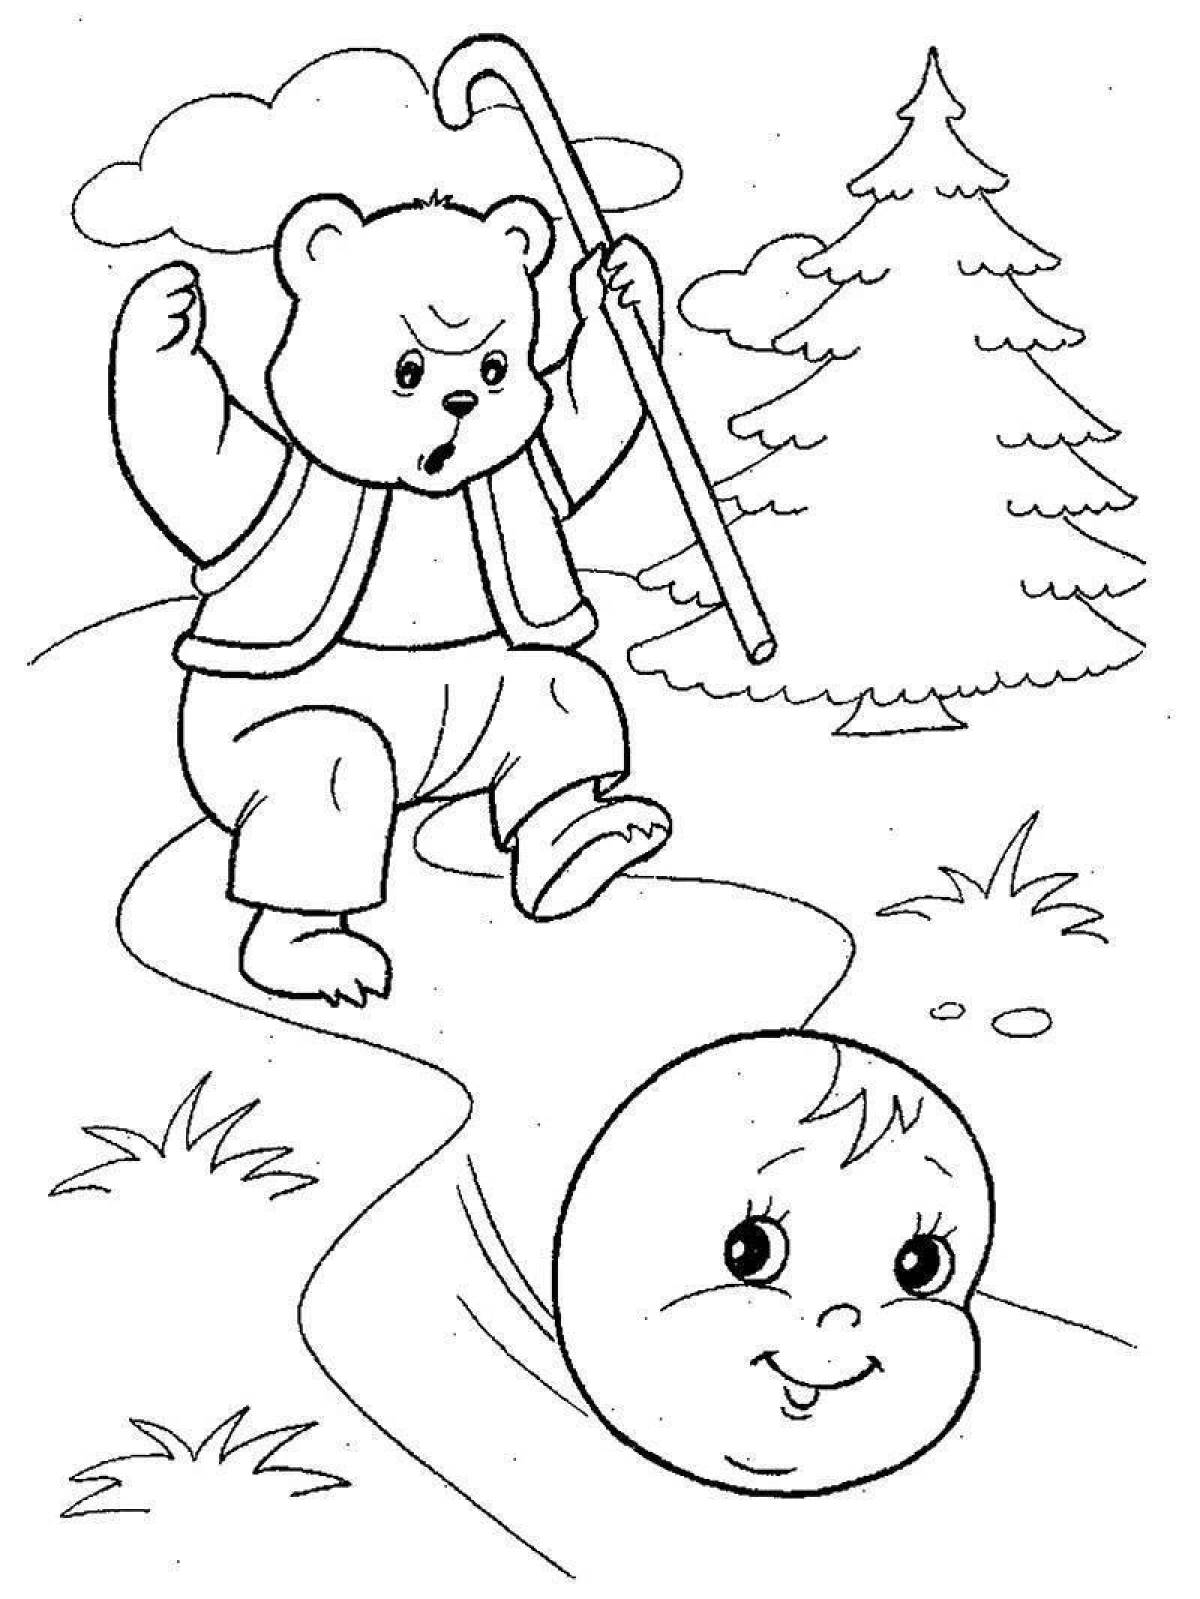 Gorgeous muffin character coloring pages